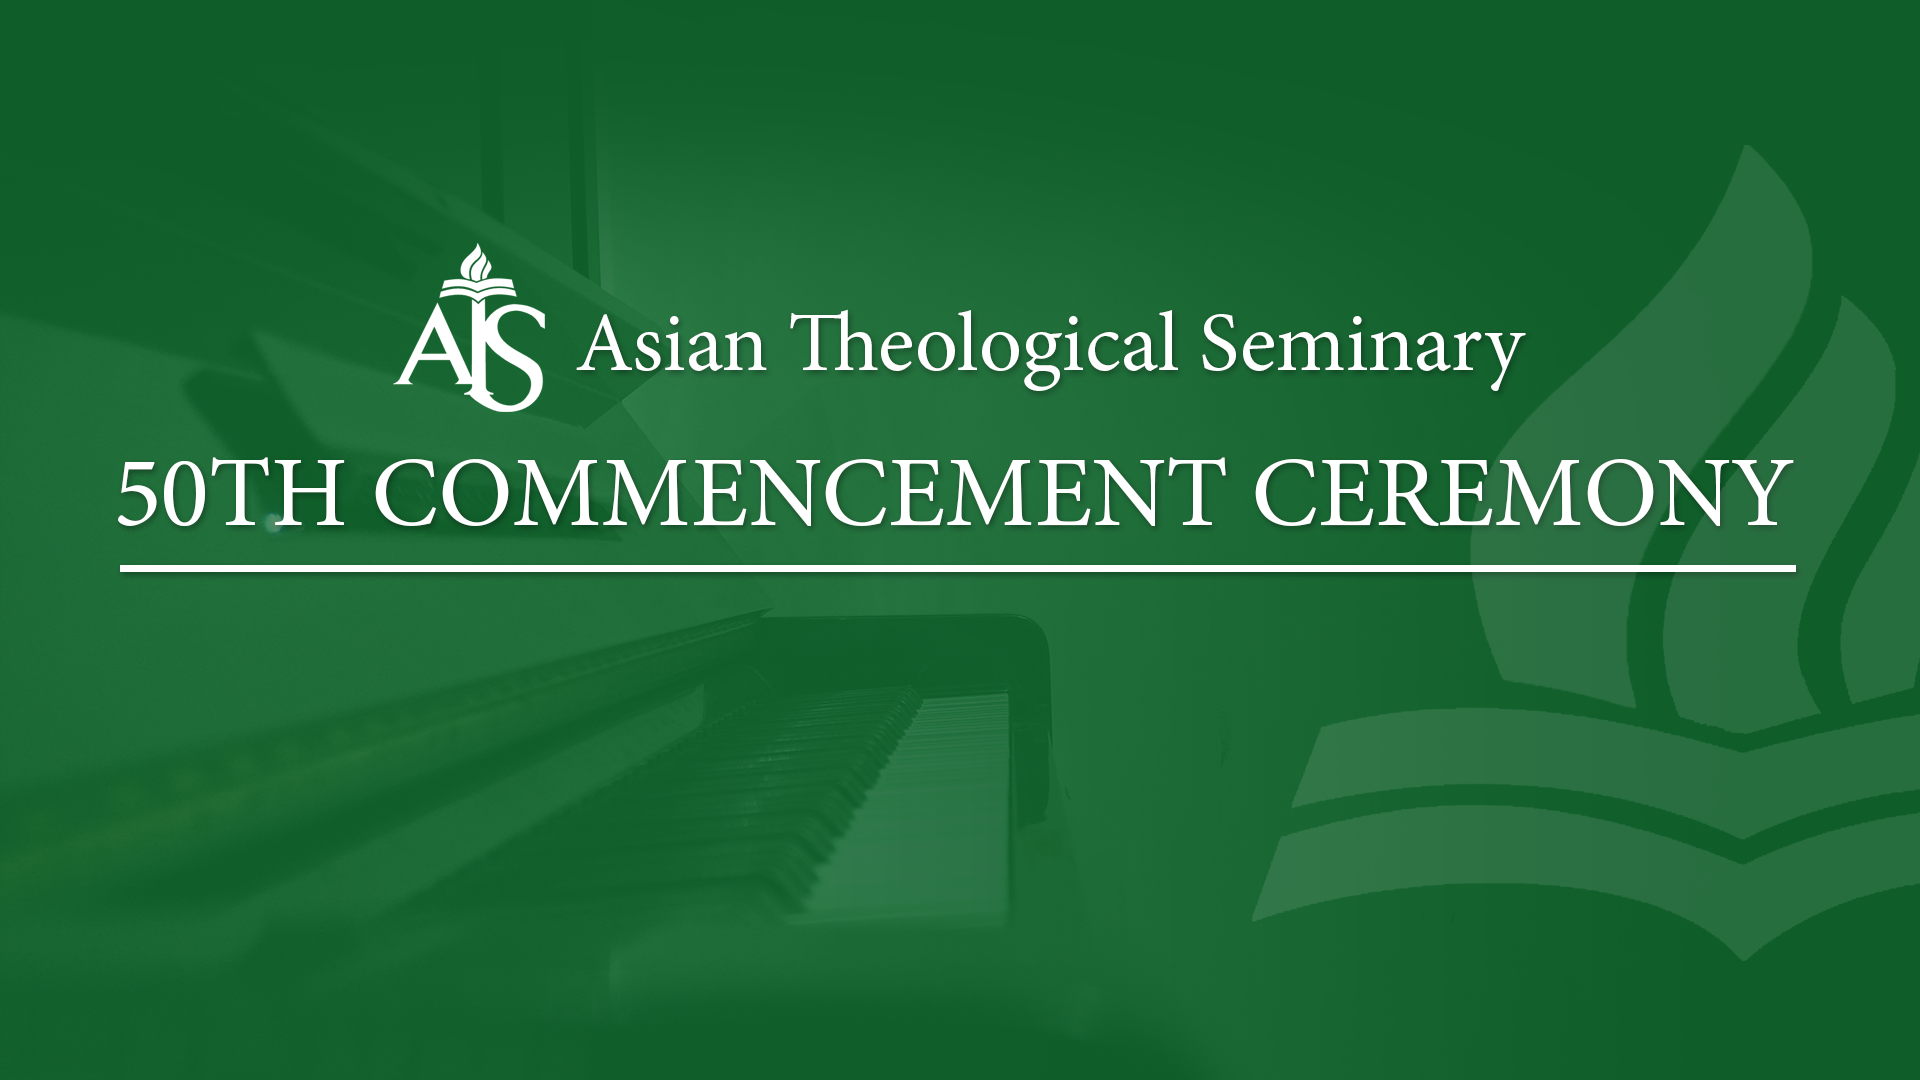 ATS 50th Commencement Ceremony